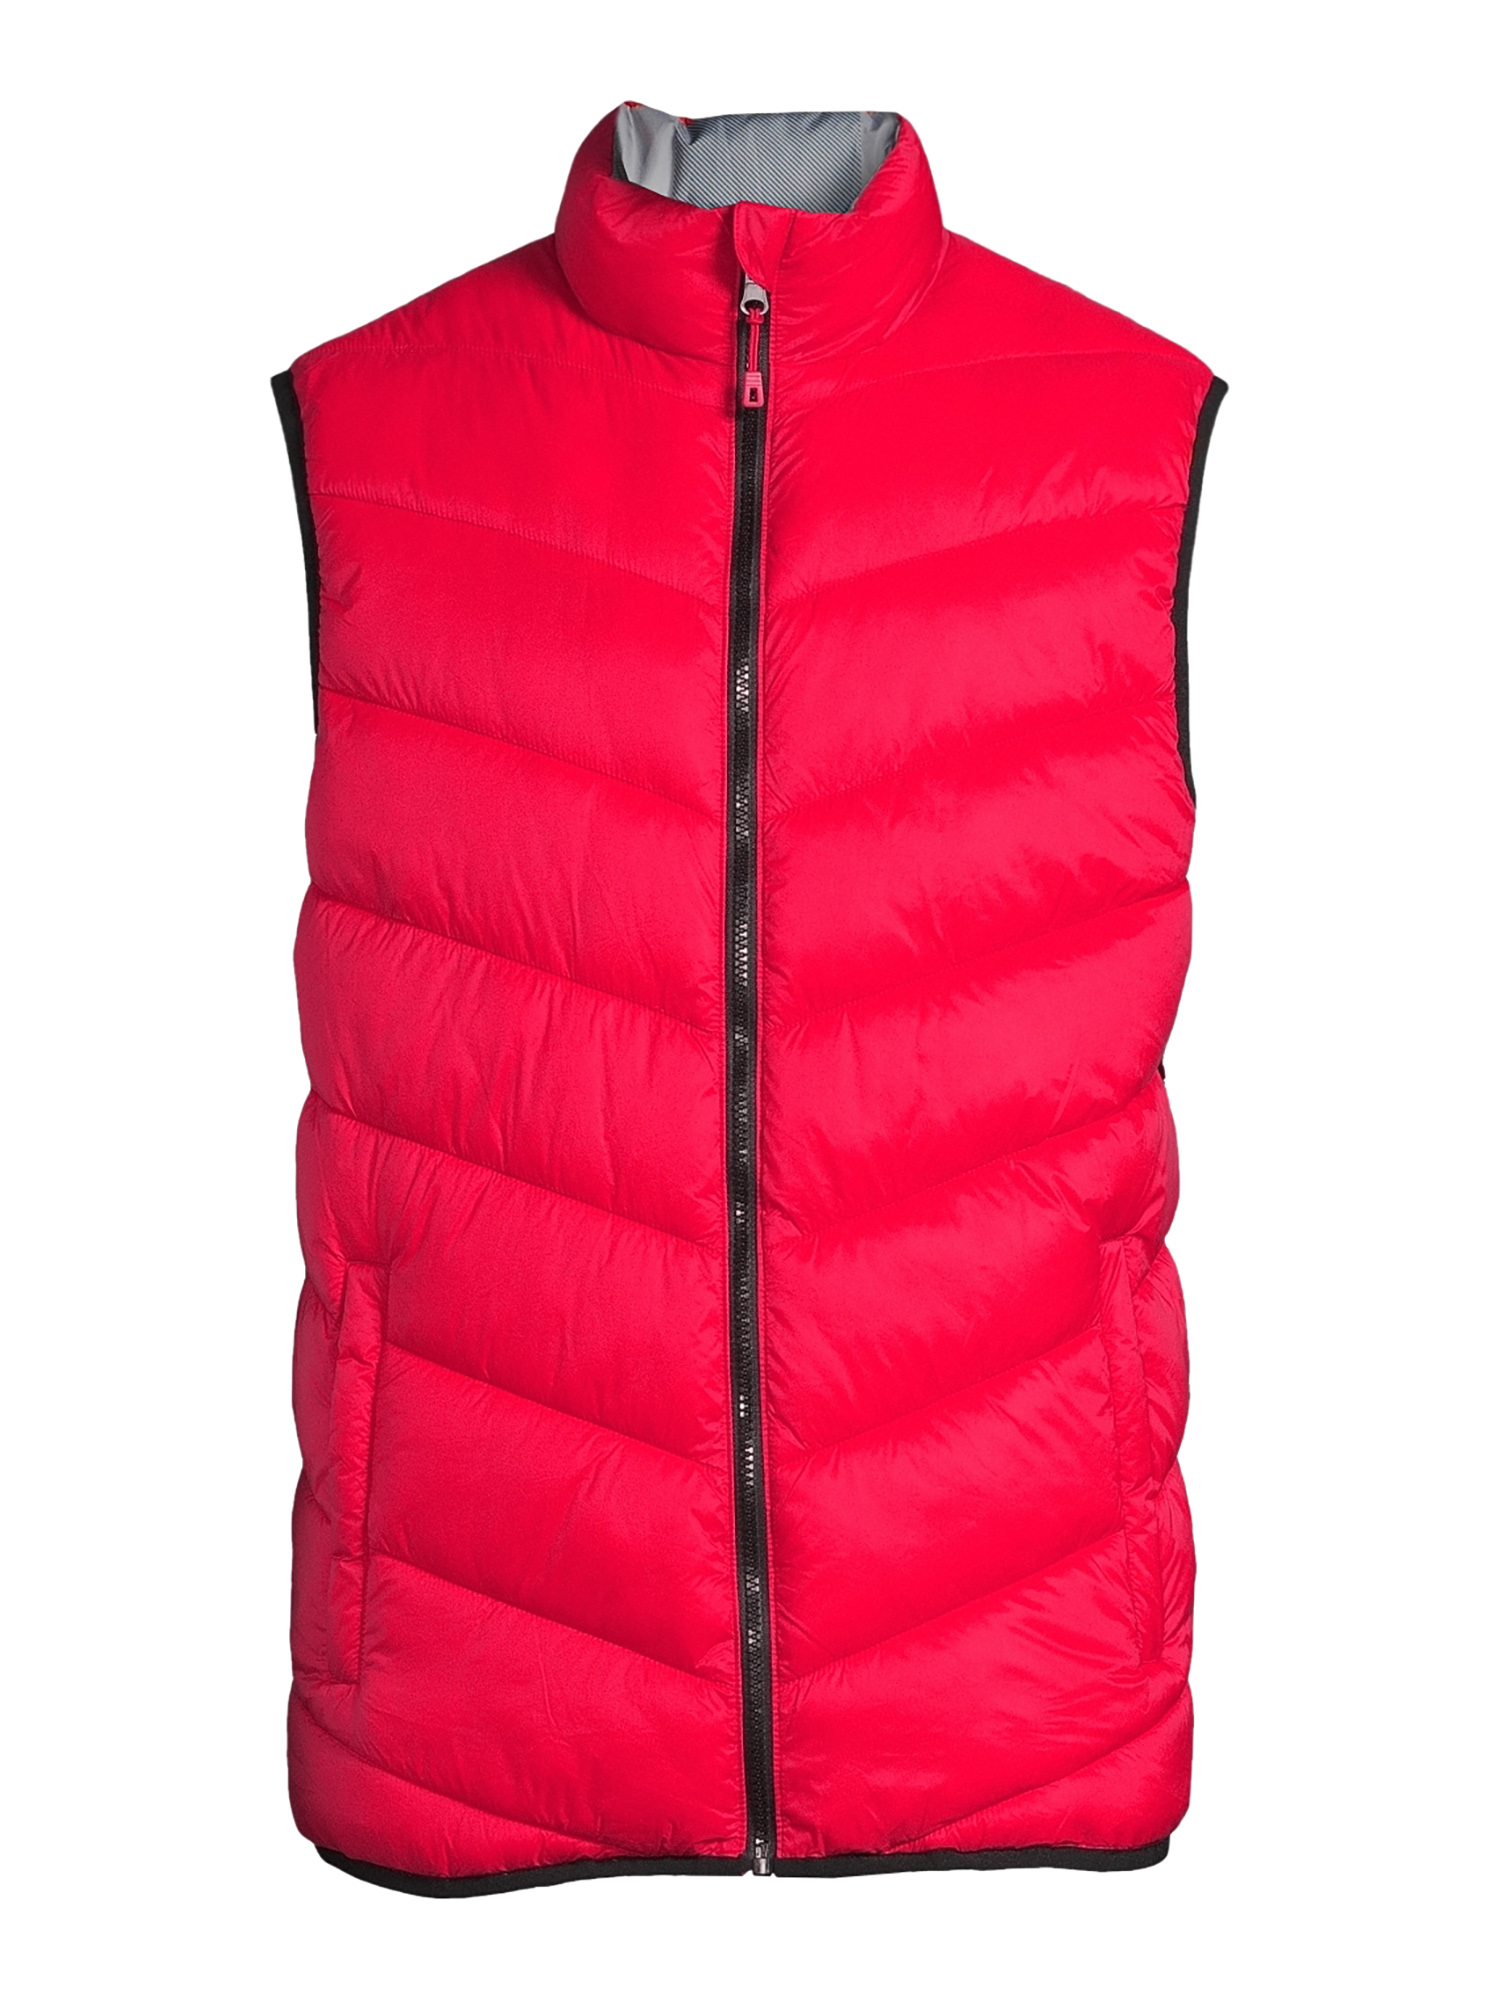 Swiss Tech Men's Reversible Puffer Vest, Up to Size 3XL - image 4 of 5